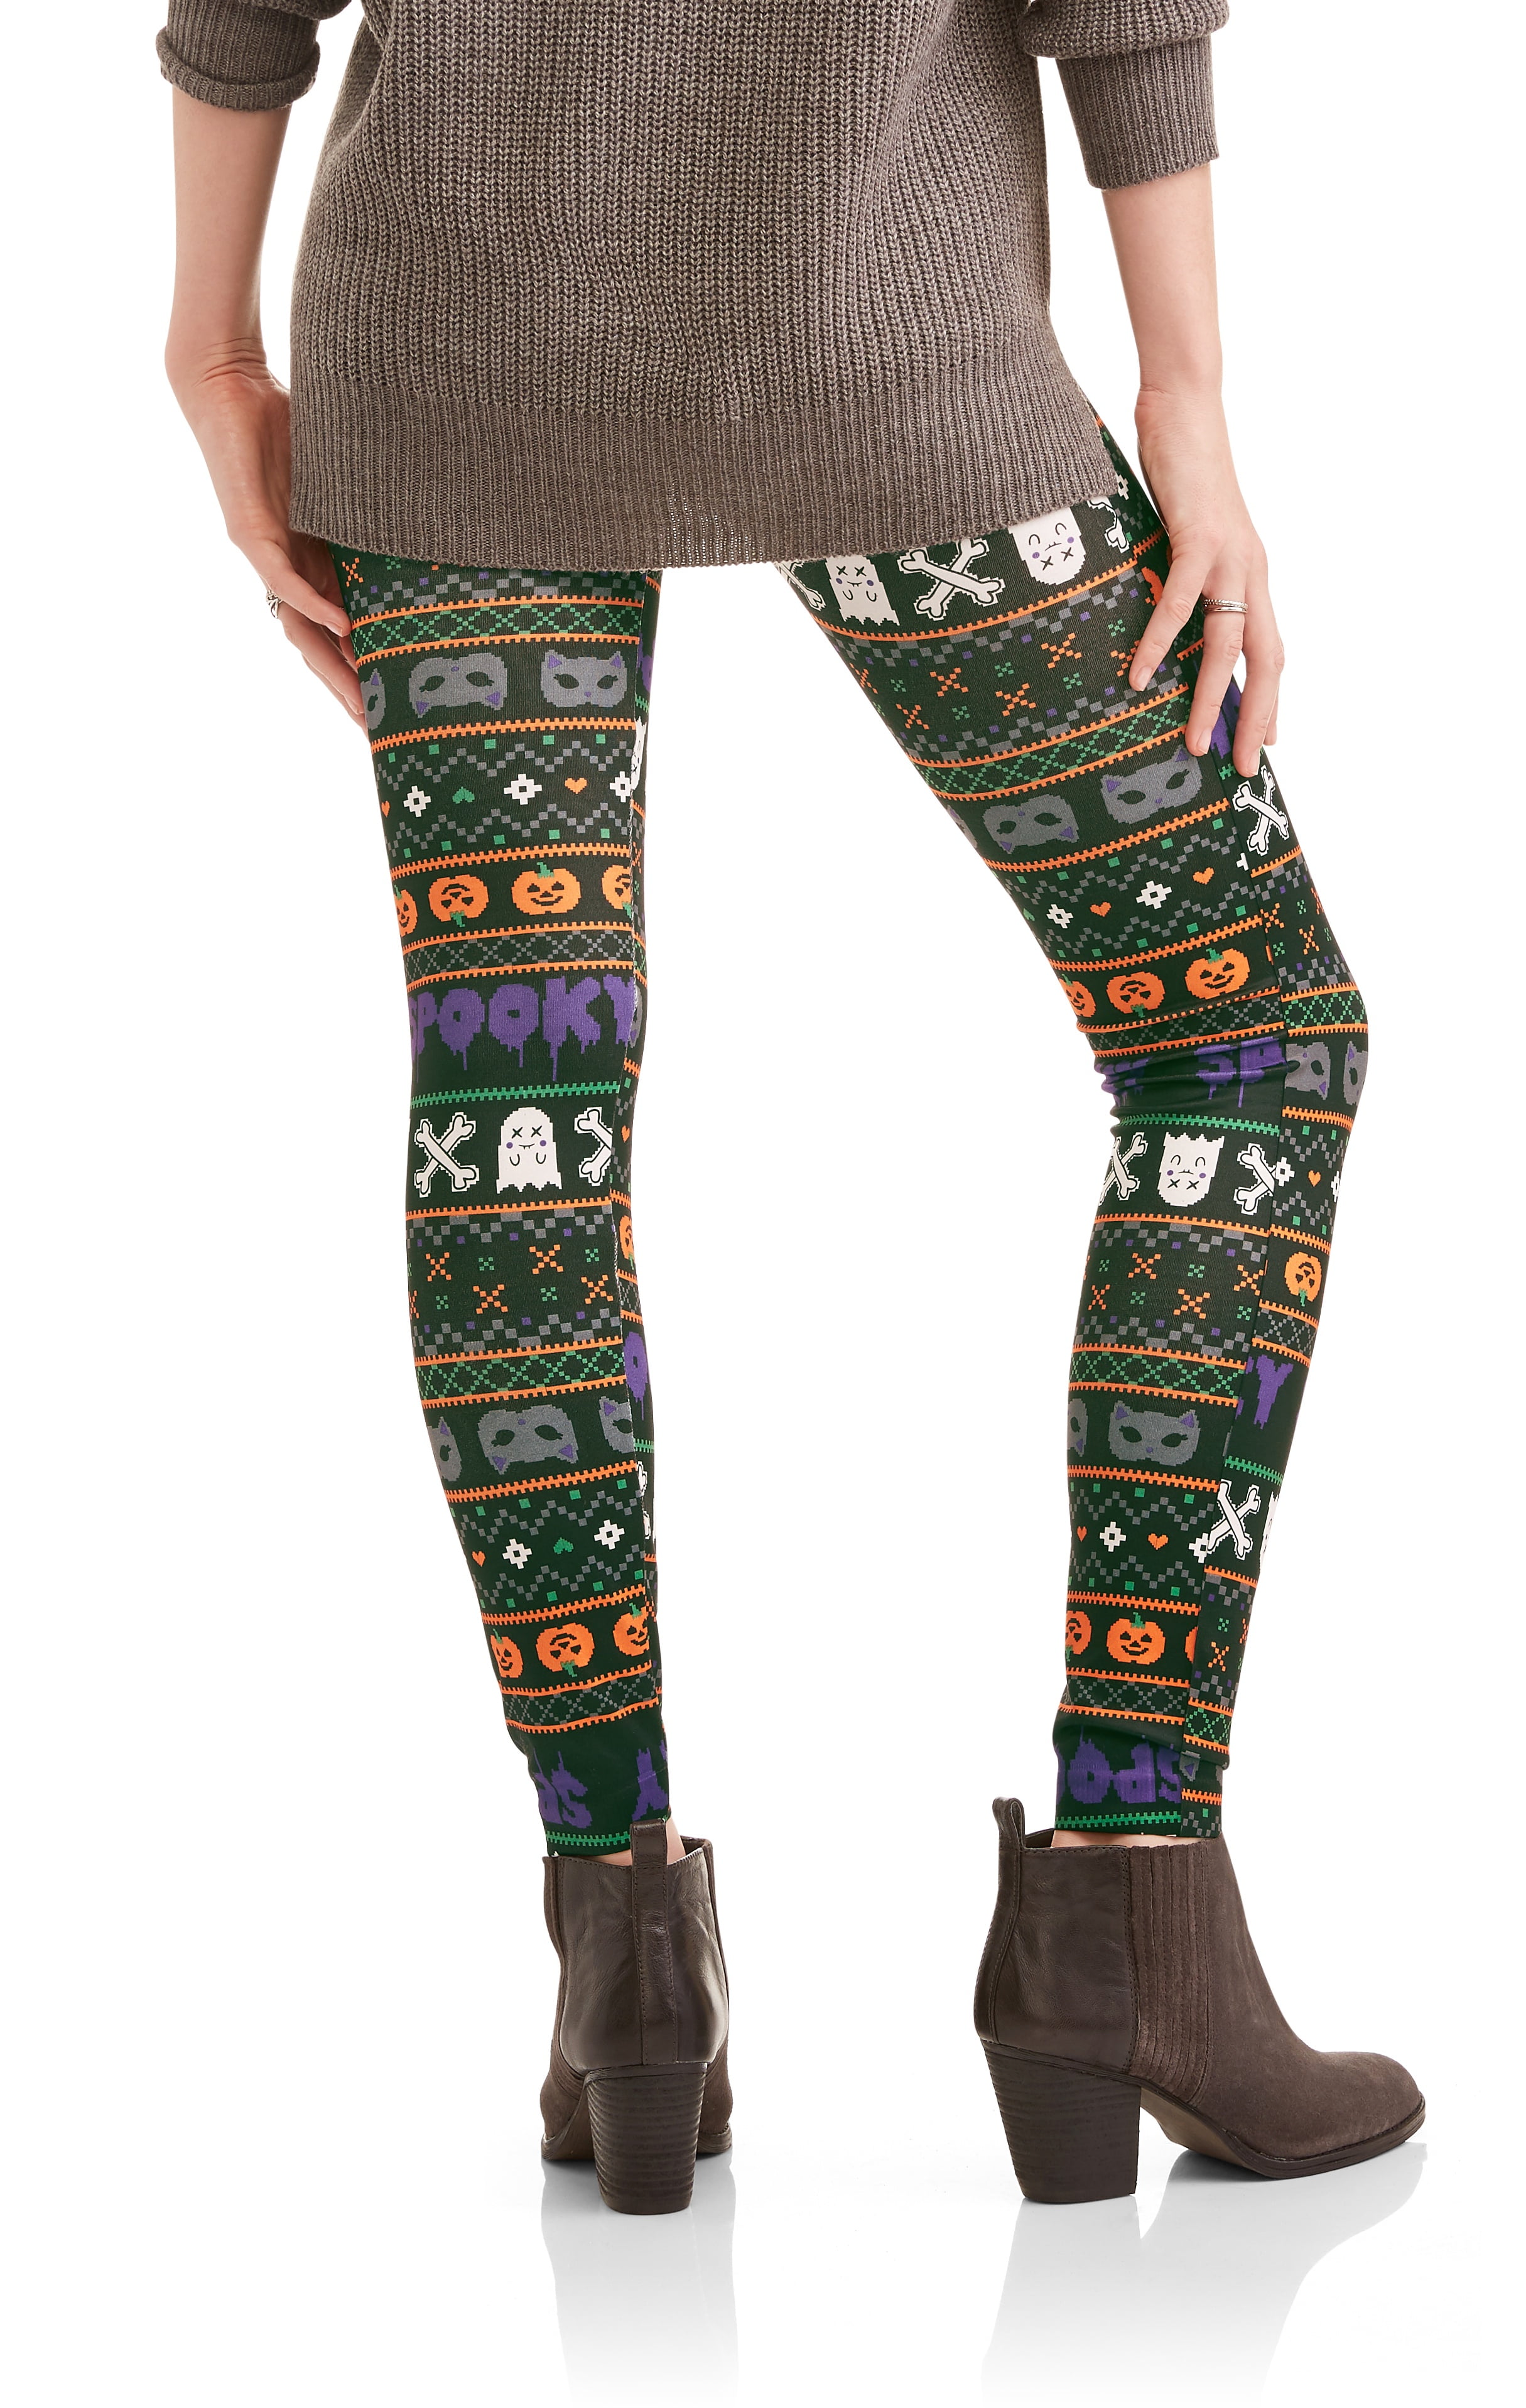 No Boundaries Junior leggings large 11/13 Size undefined - $14 - From Mindy